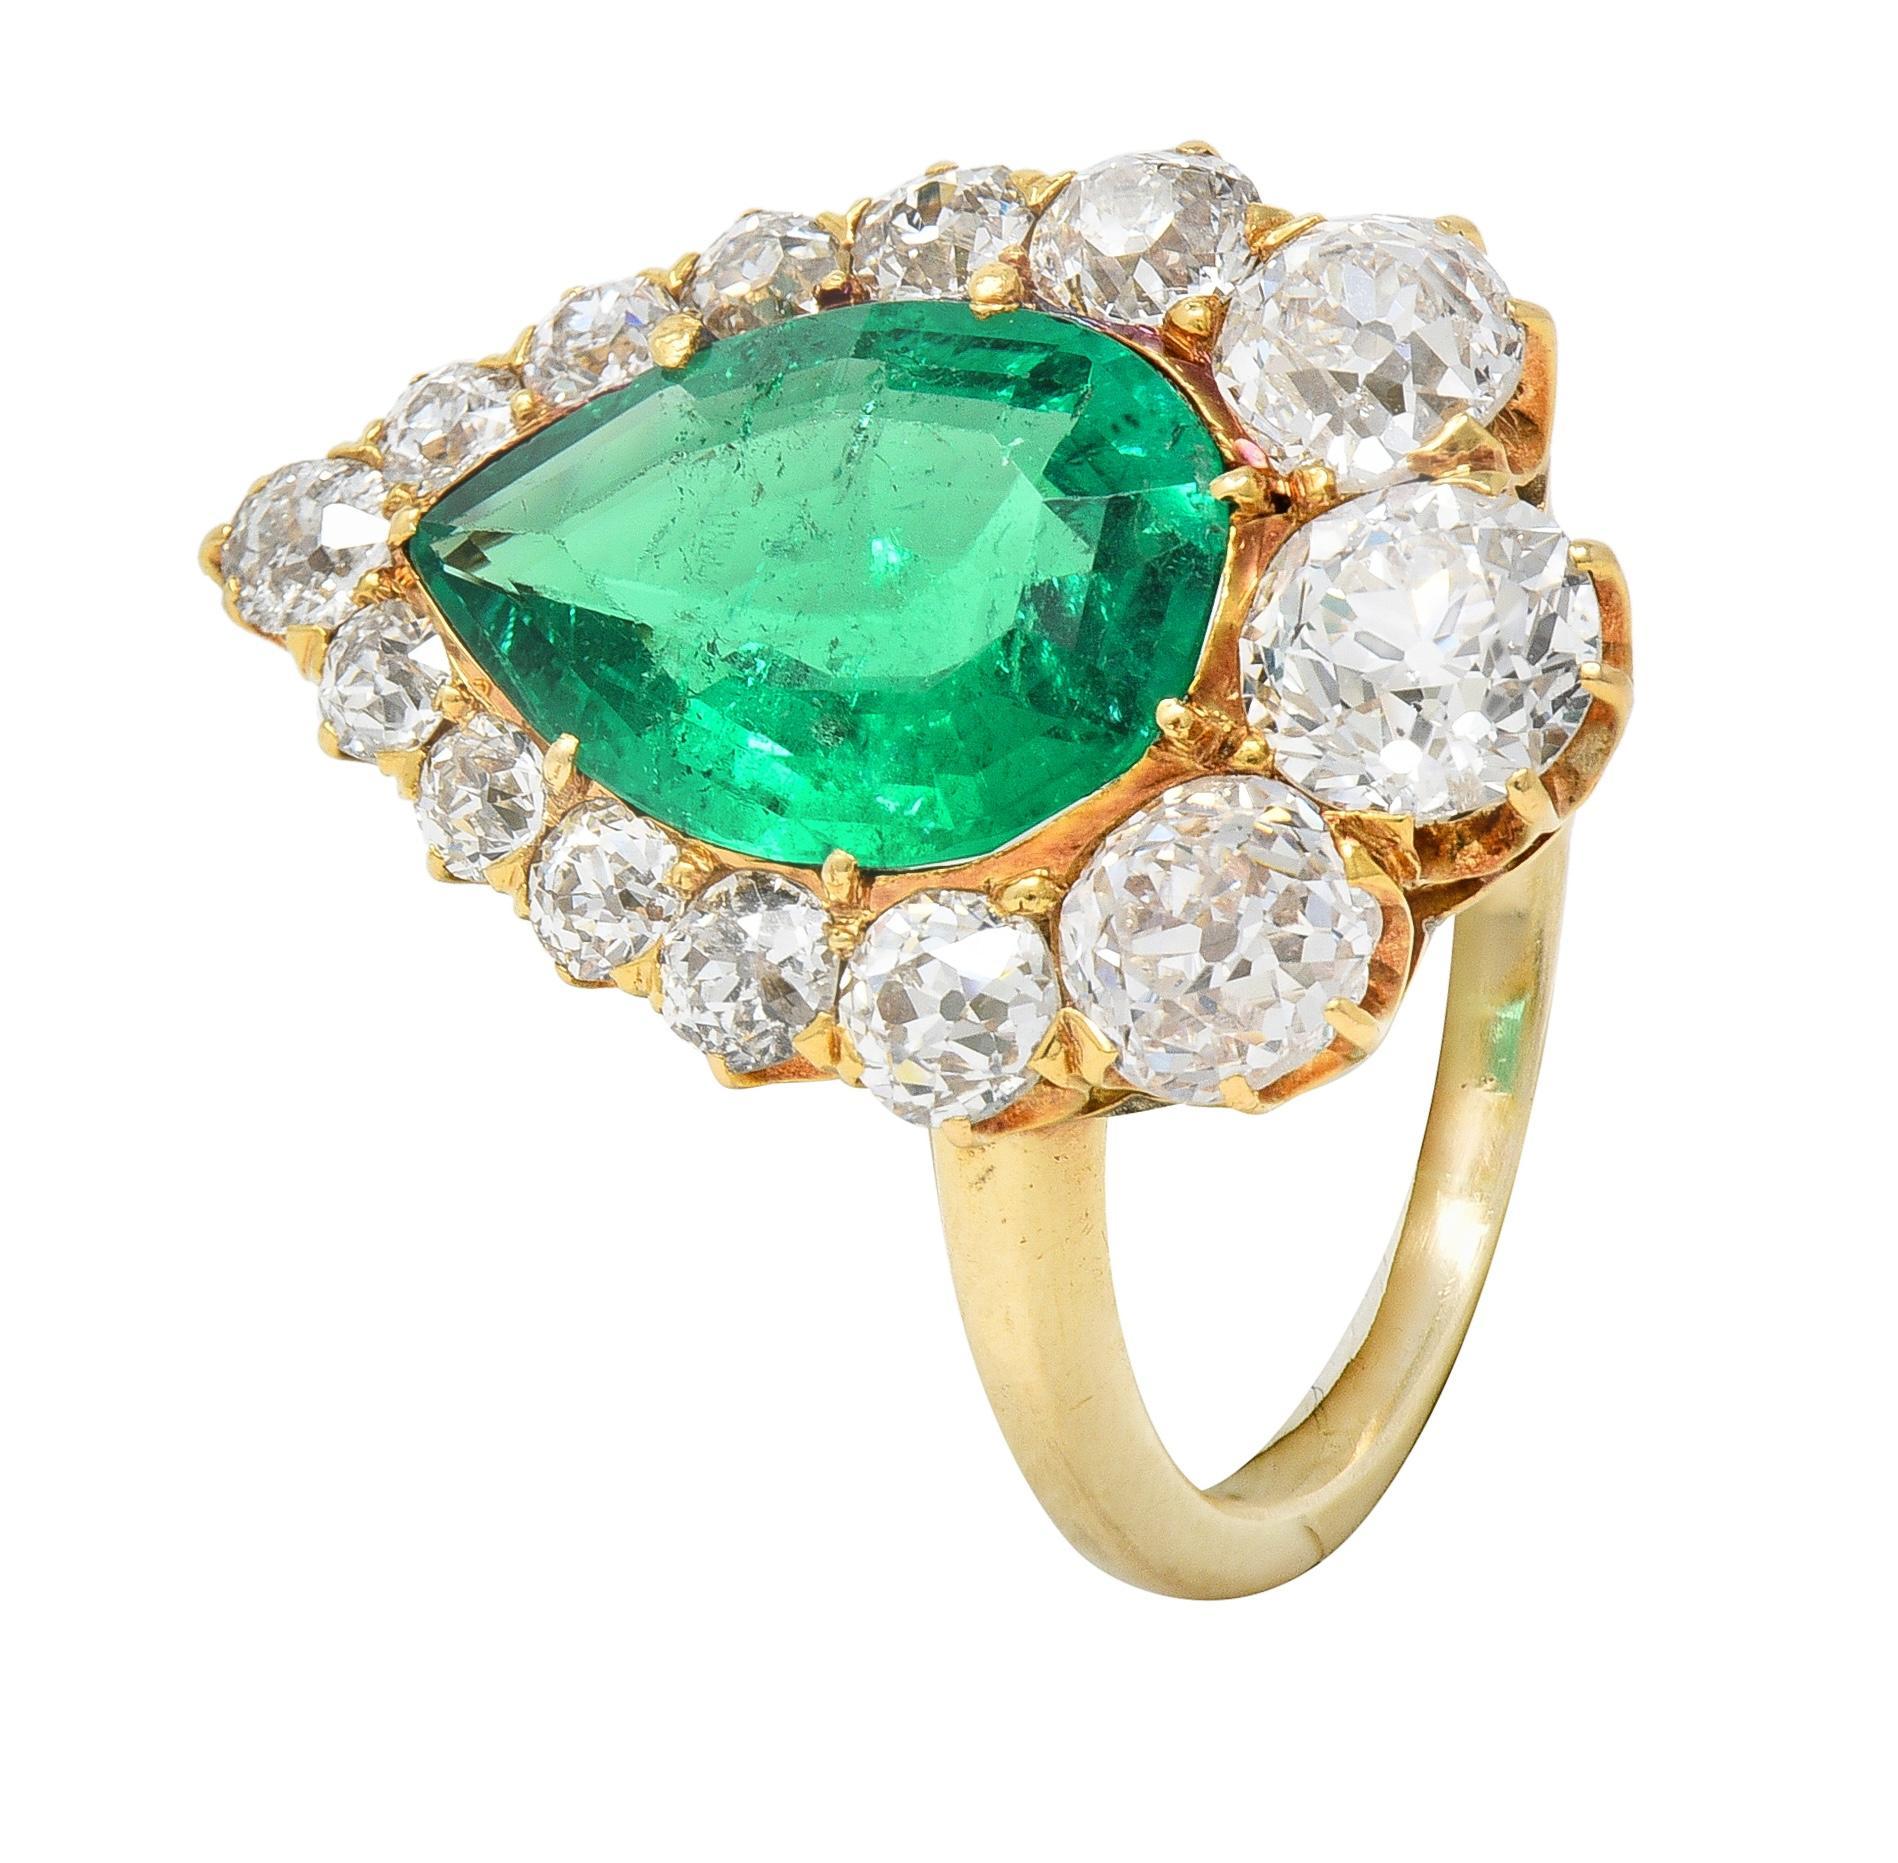 Late Victorian 5.34 CTW Pear Colombian Emerald Diamond 18 Karat Gold Ring AGL For Sale 2